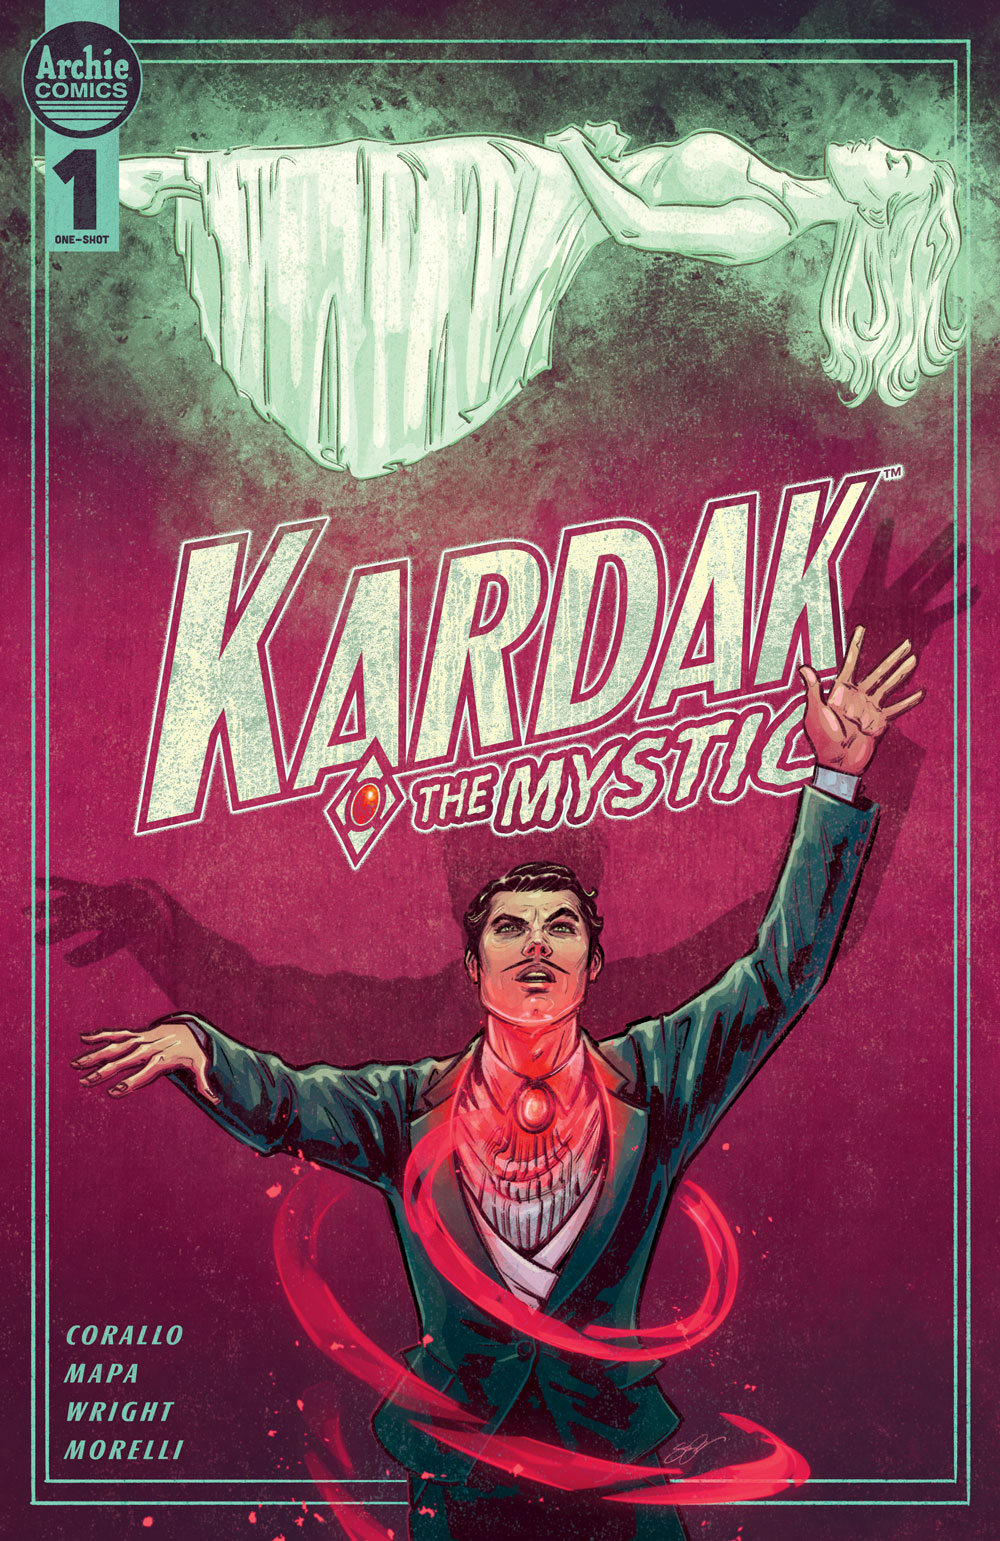 Kardak, an older slender white main with dark hair and a gray streak, is dressed and performing magic on stage. He wears a glowing ruby pendant around his neck which is emitting swirls of red energy. His hands are outsretched and a glowing green girl is levitating above him. 